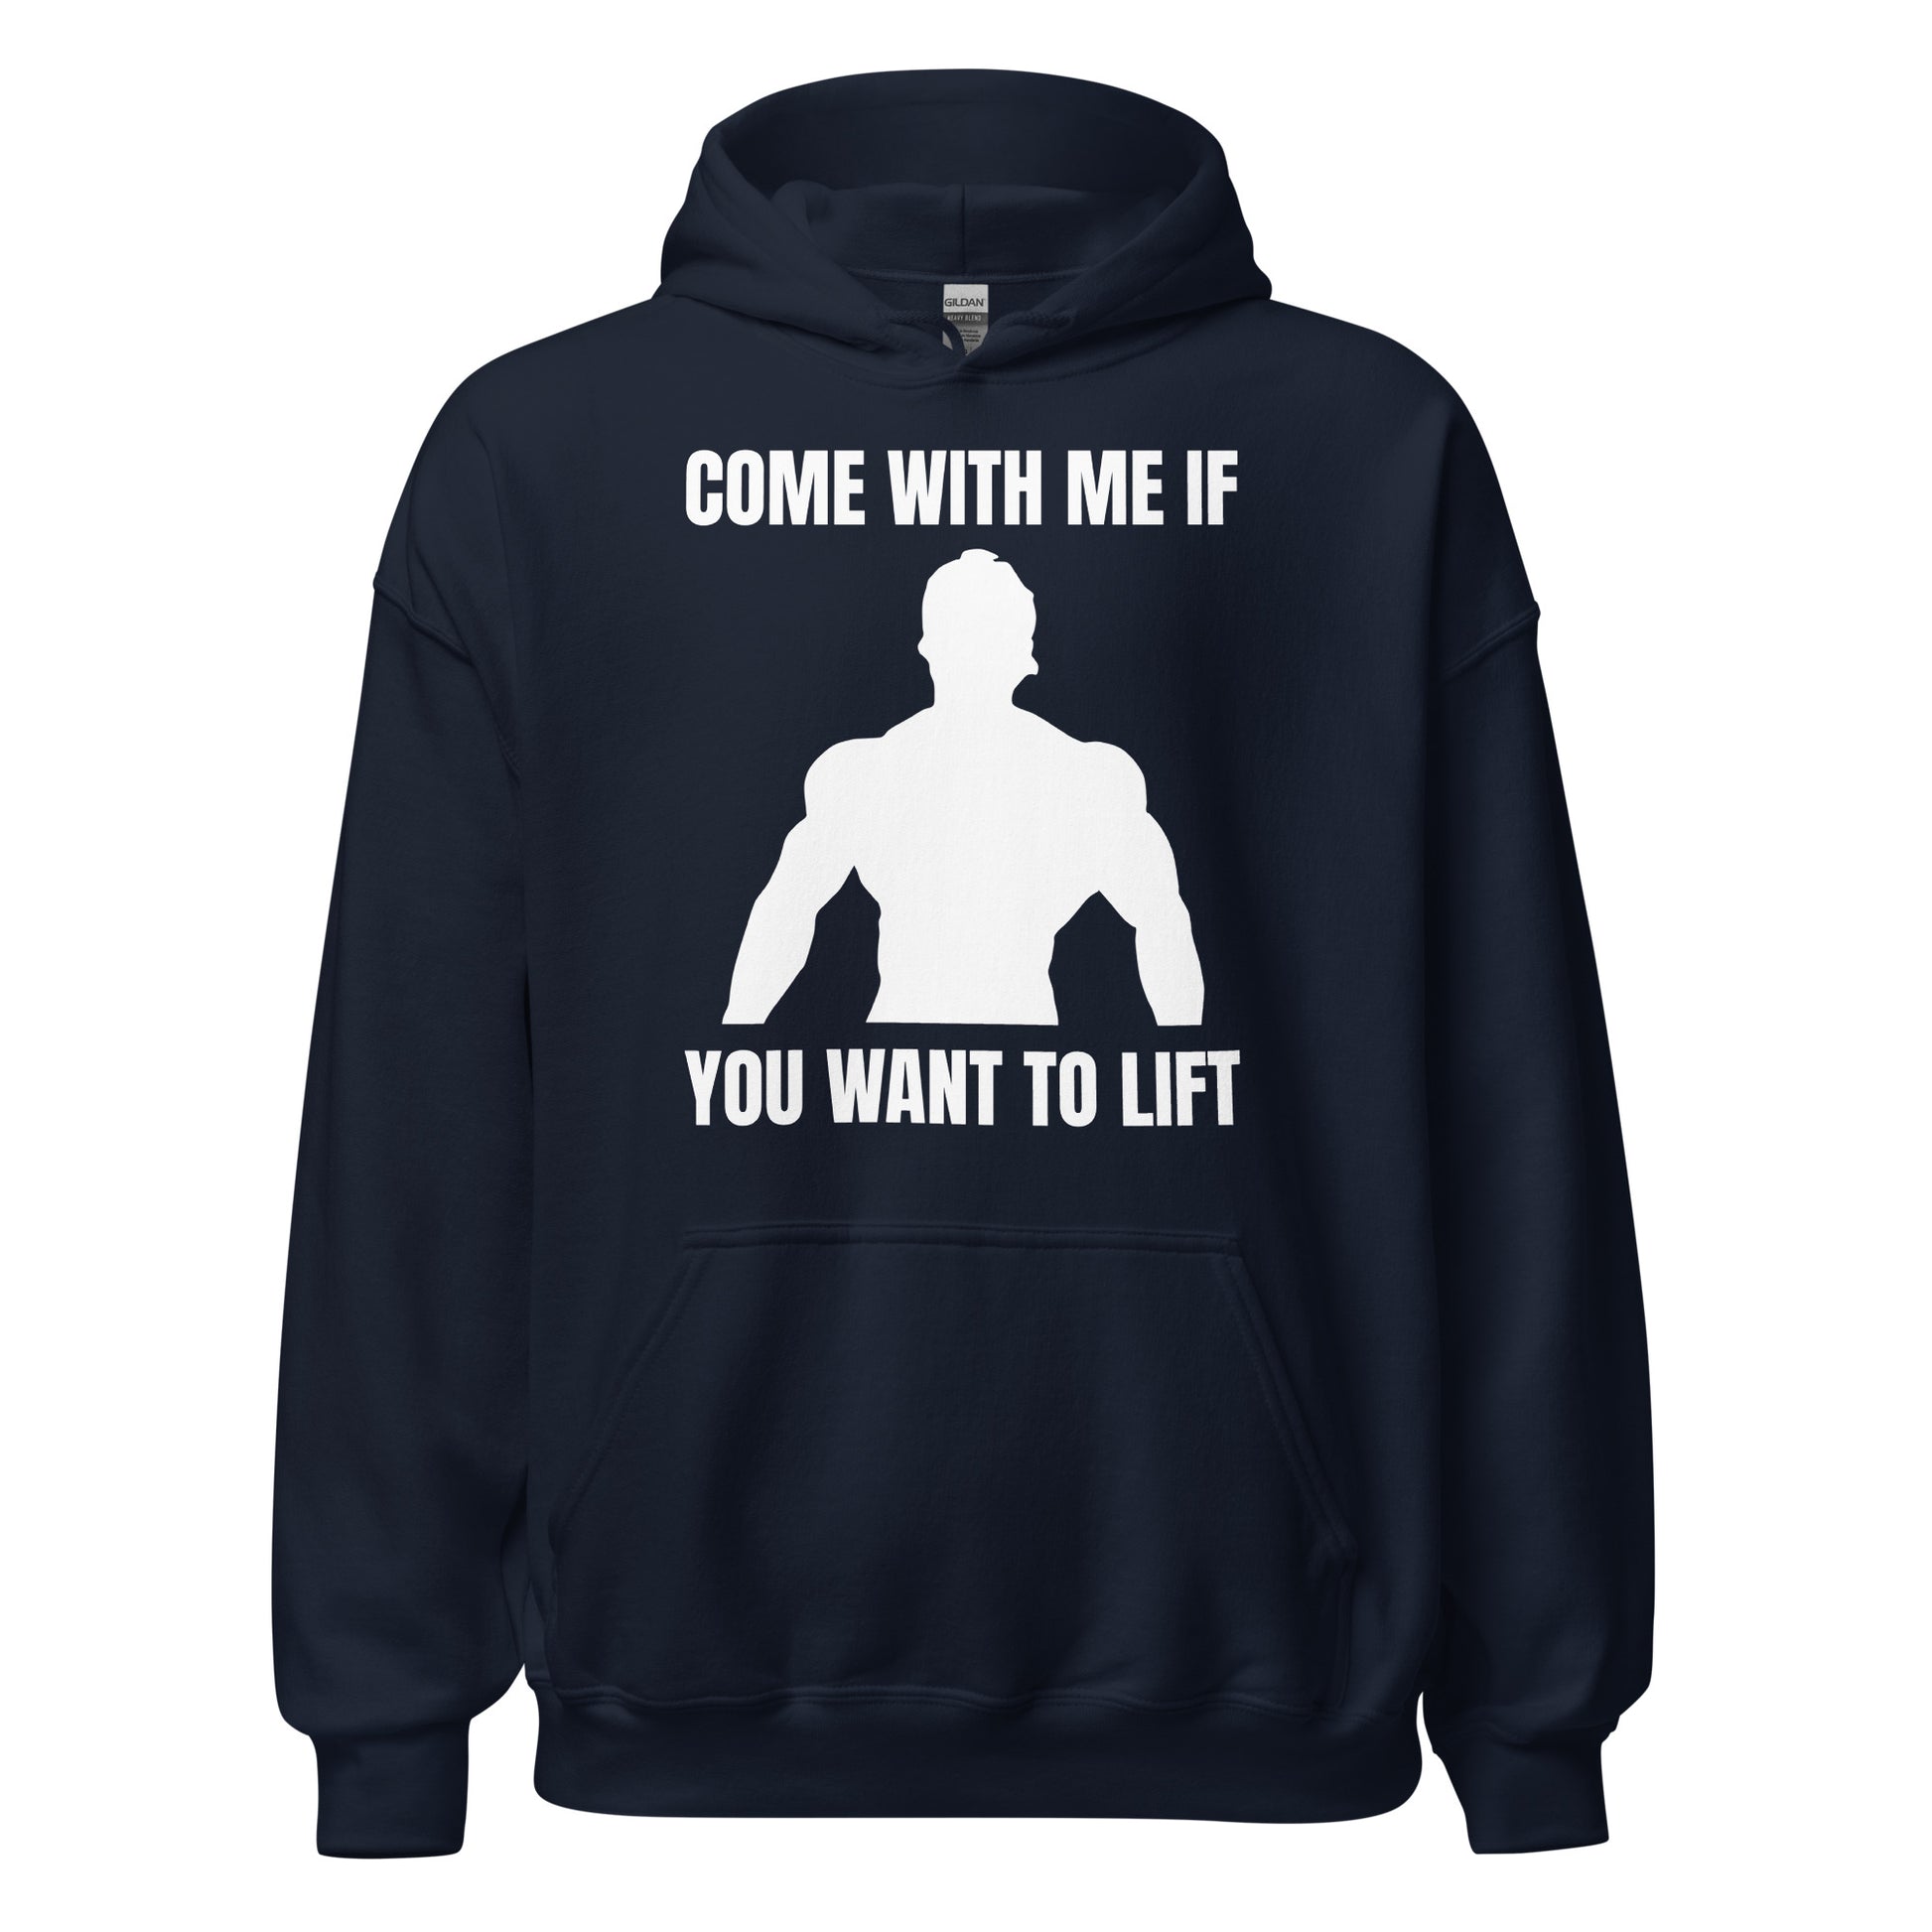 Come with Me if You Want to Lift Hoodie in Navy